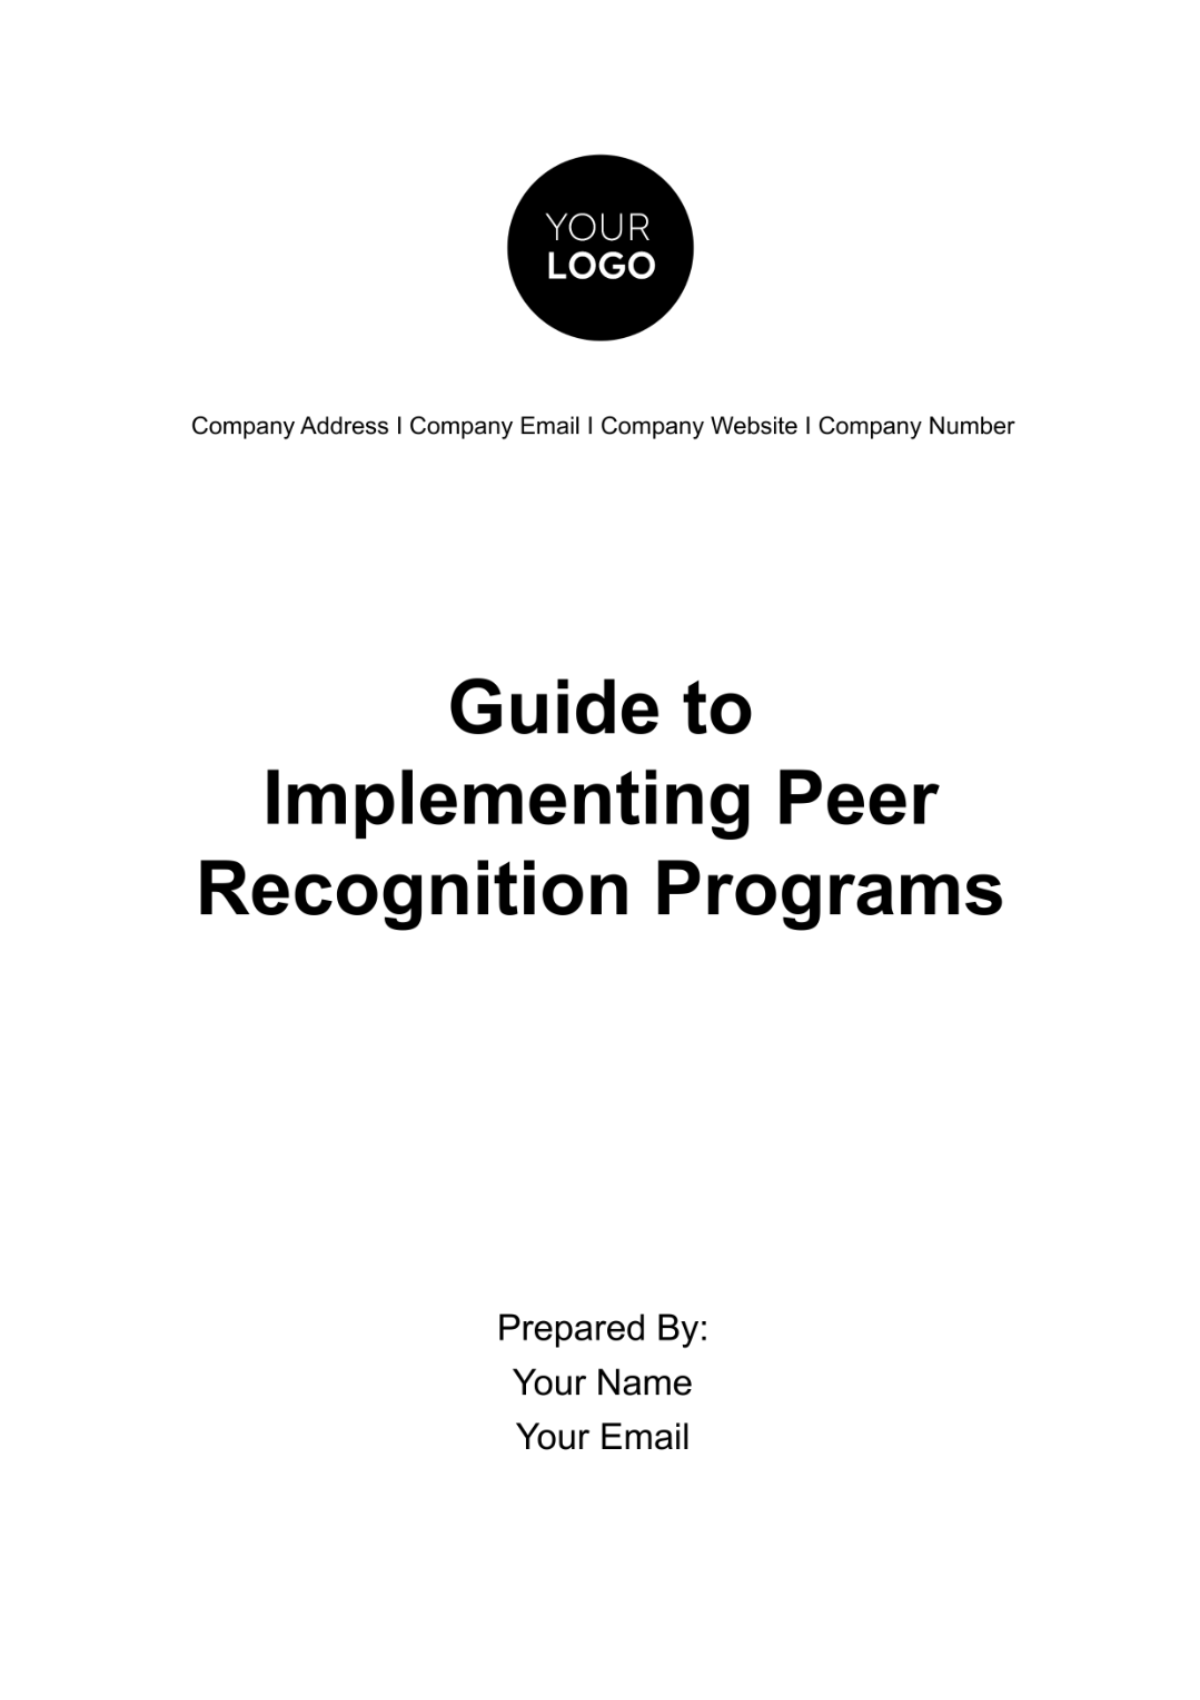 Guide to Implementing Peer Recognition Programs HR Template